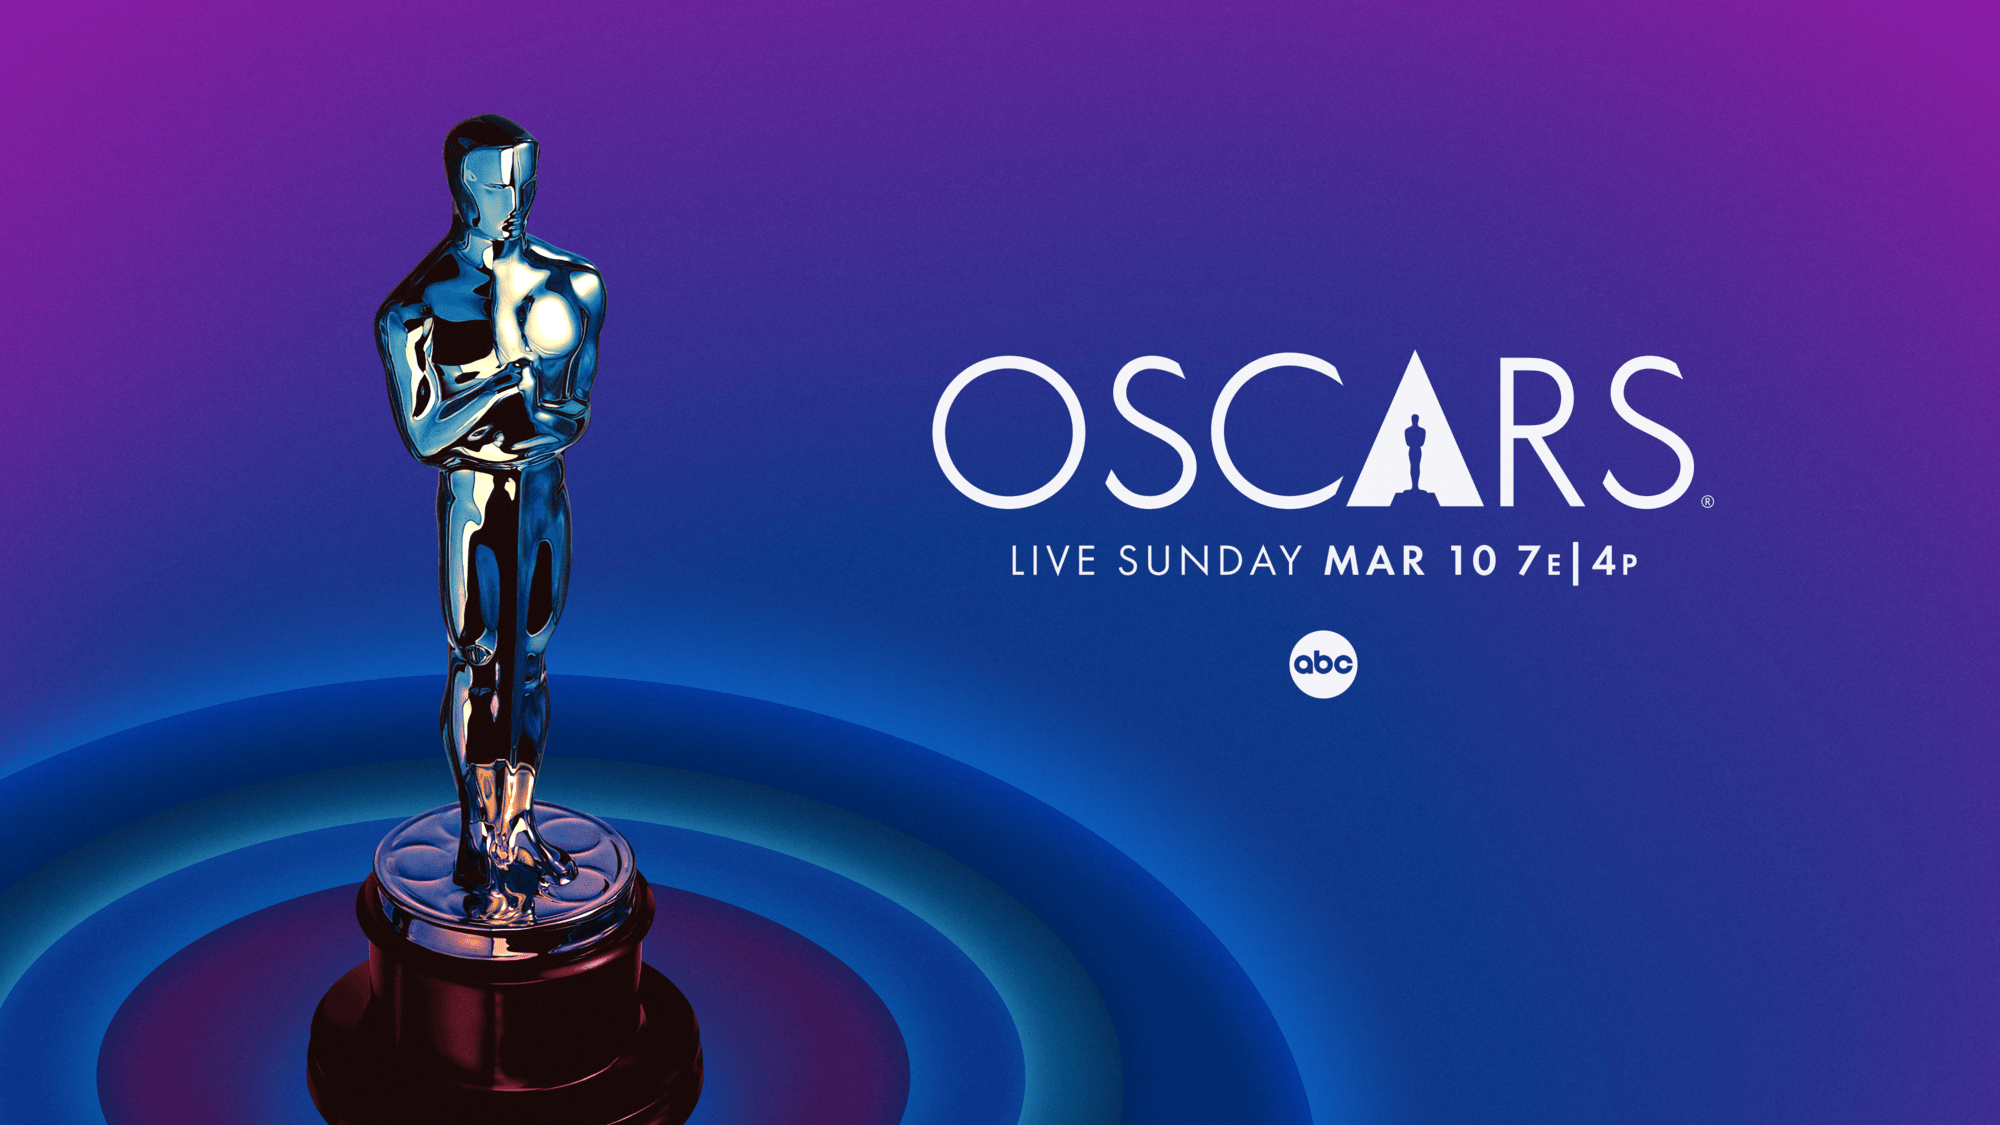 VANESSA HUDGENS RETURNS TO HOST “THE OSCARS® RED CARPET SHOW,” JULIANNE HOUGH JOINS AS CO-HOST MARCH 10 ON ABC